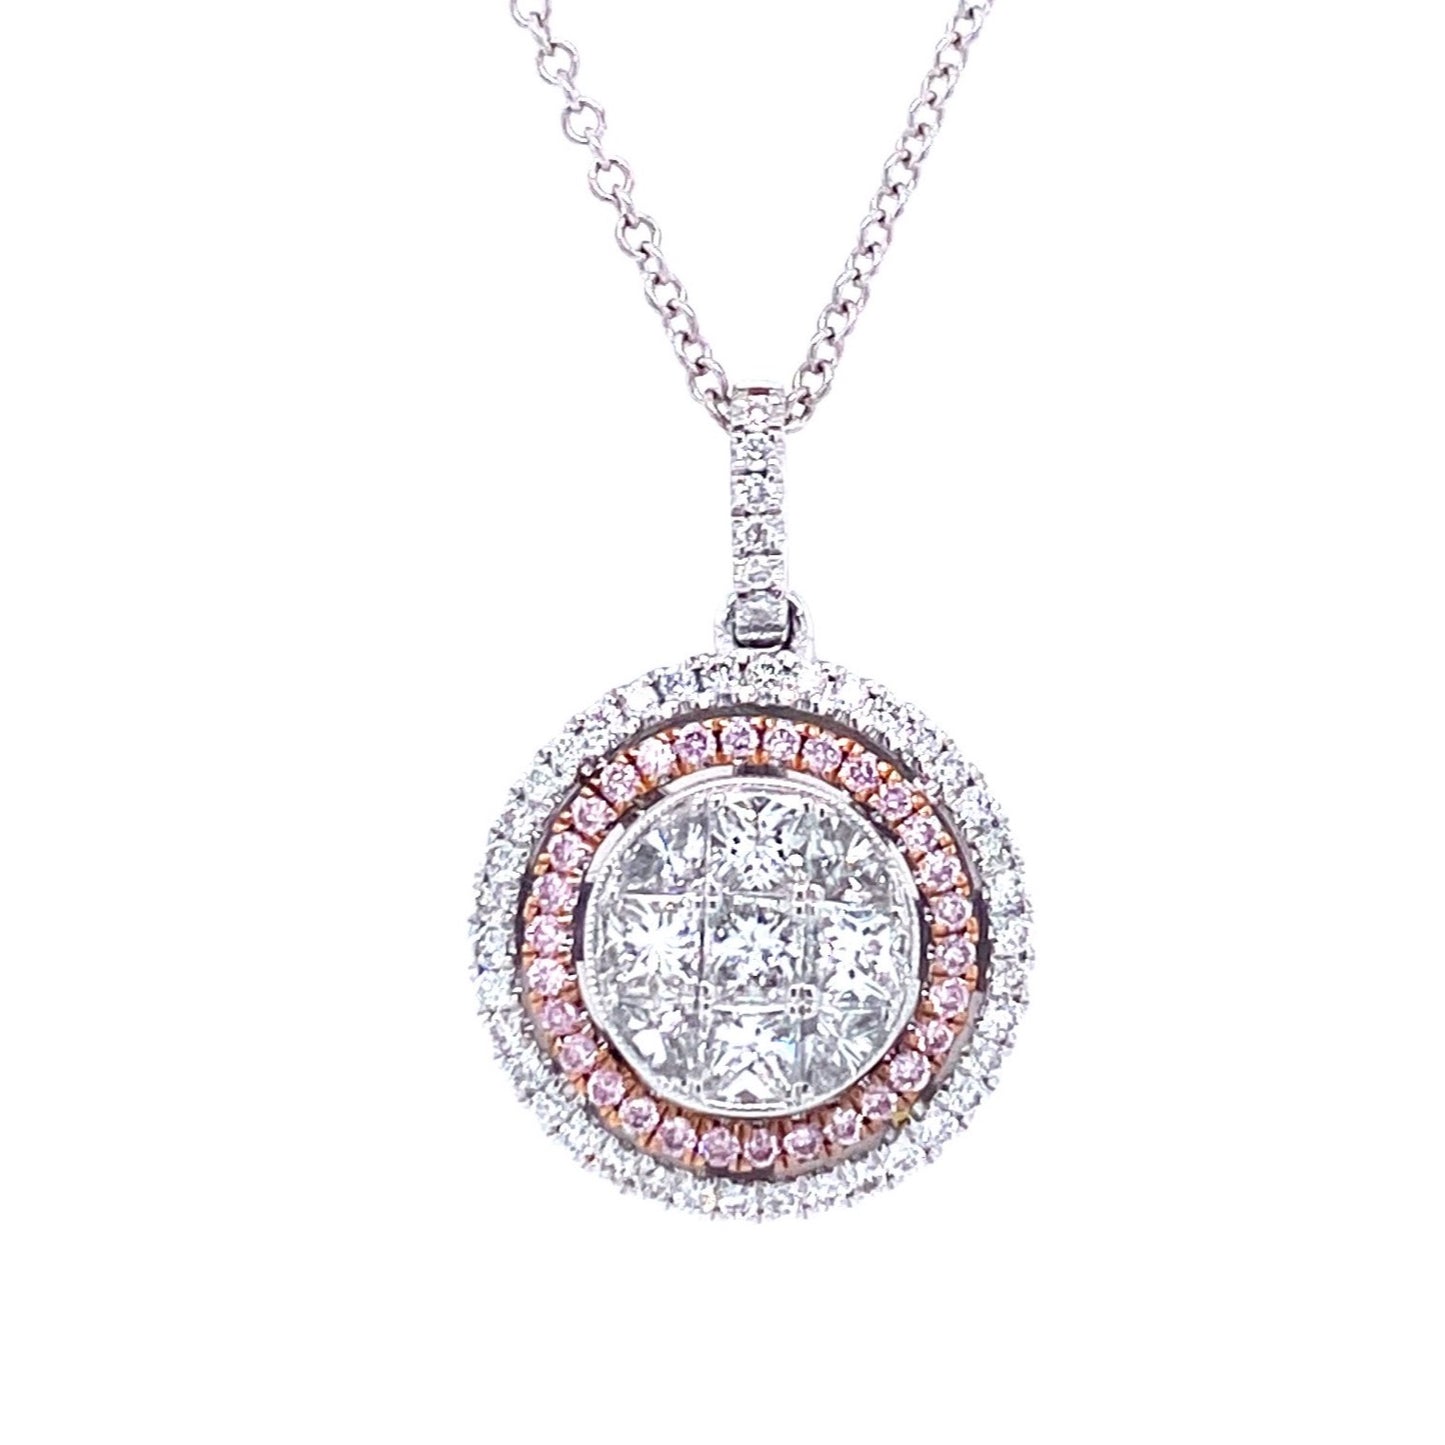 WHITE & ROSE GOLD WITH PINK DIAMONDS NECKLACE | Simon G | Luby 